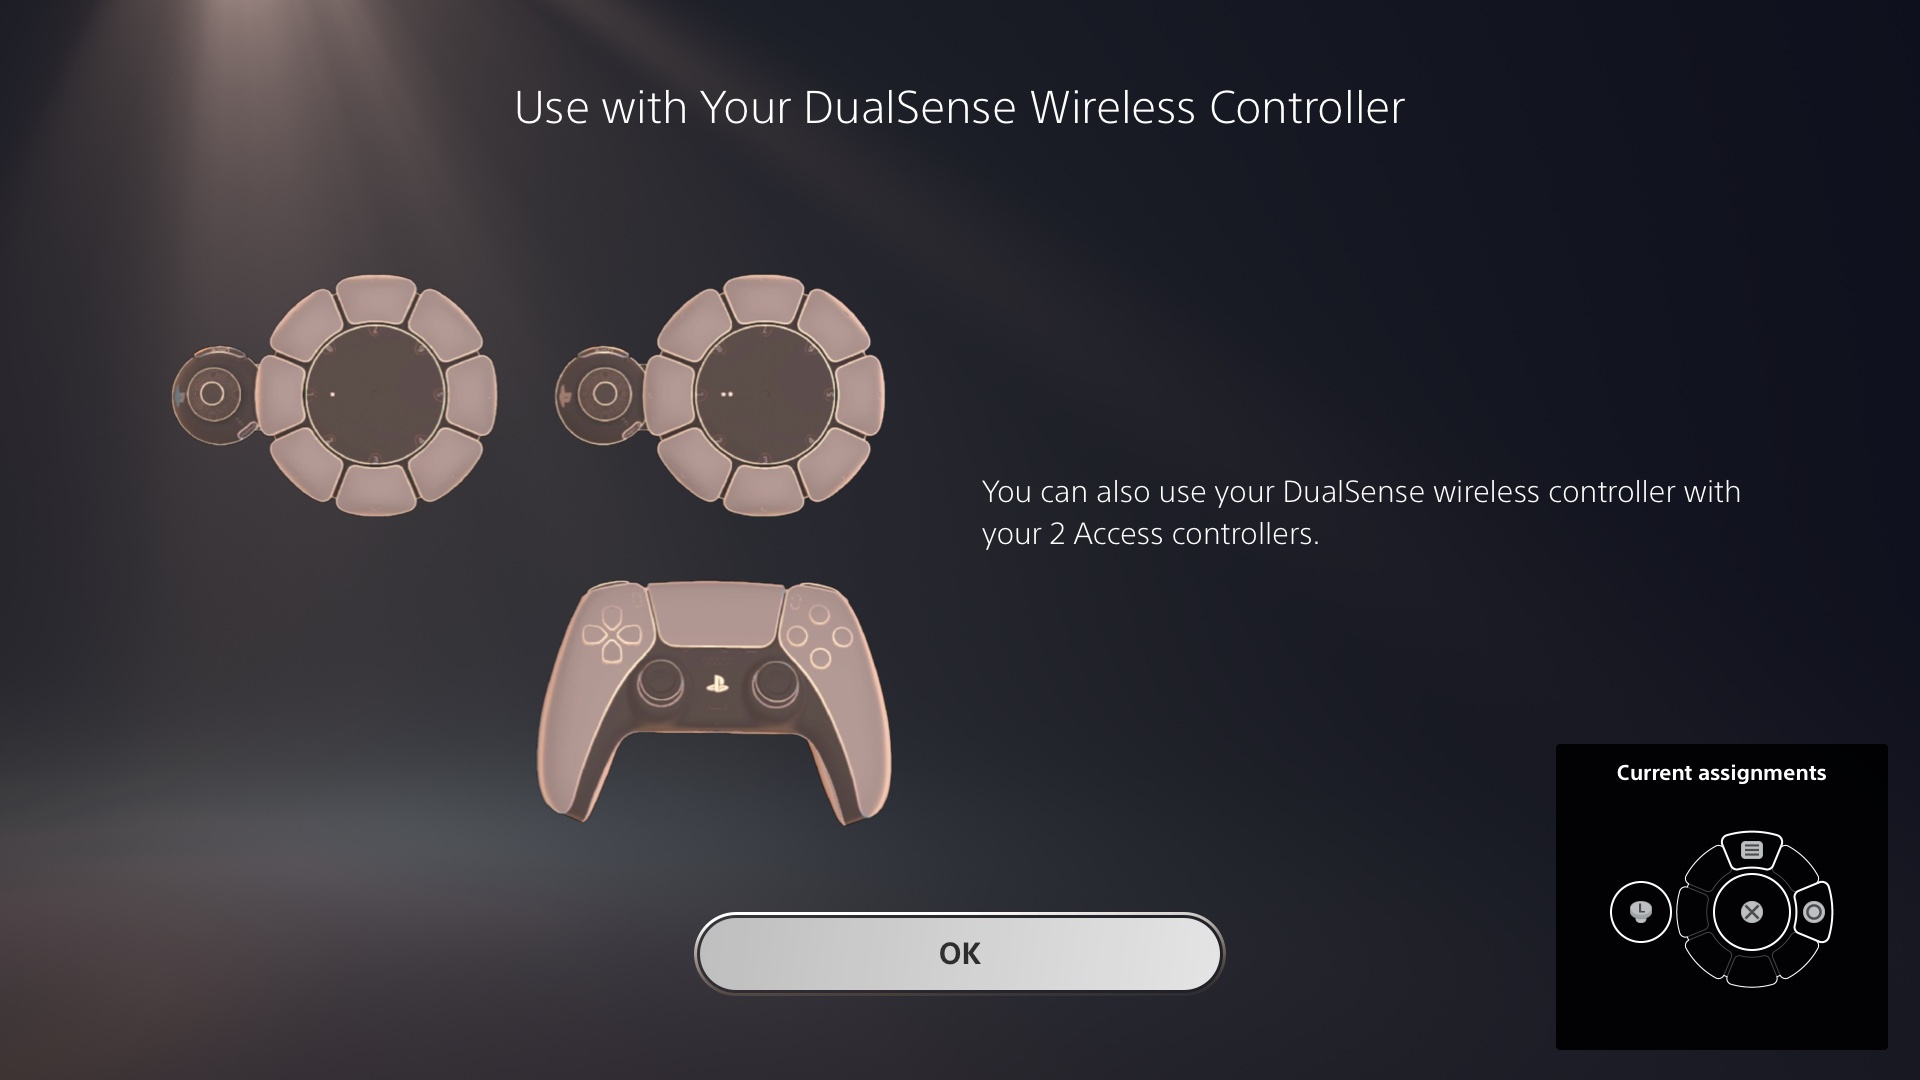  "Access controller UI image showing the ability to pair up to two Access controllers with a DualSense controller"